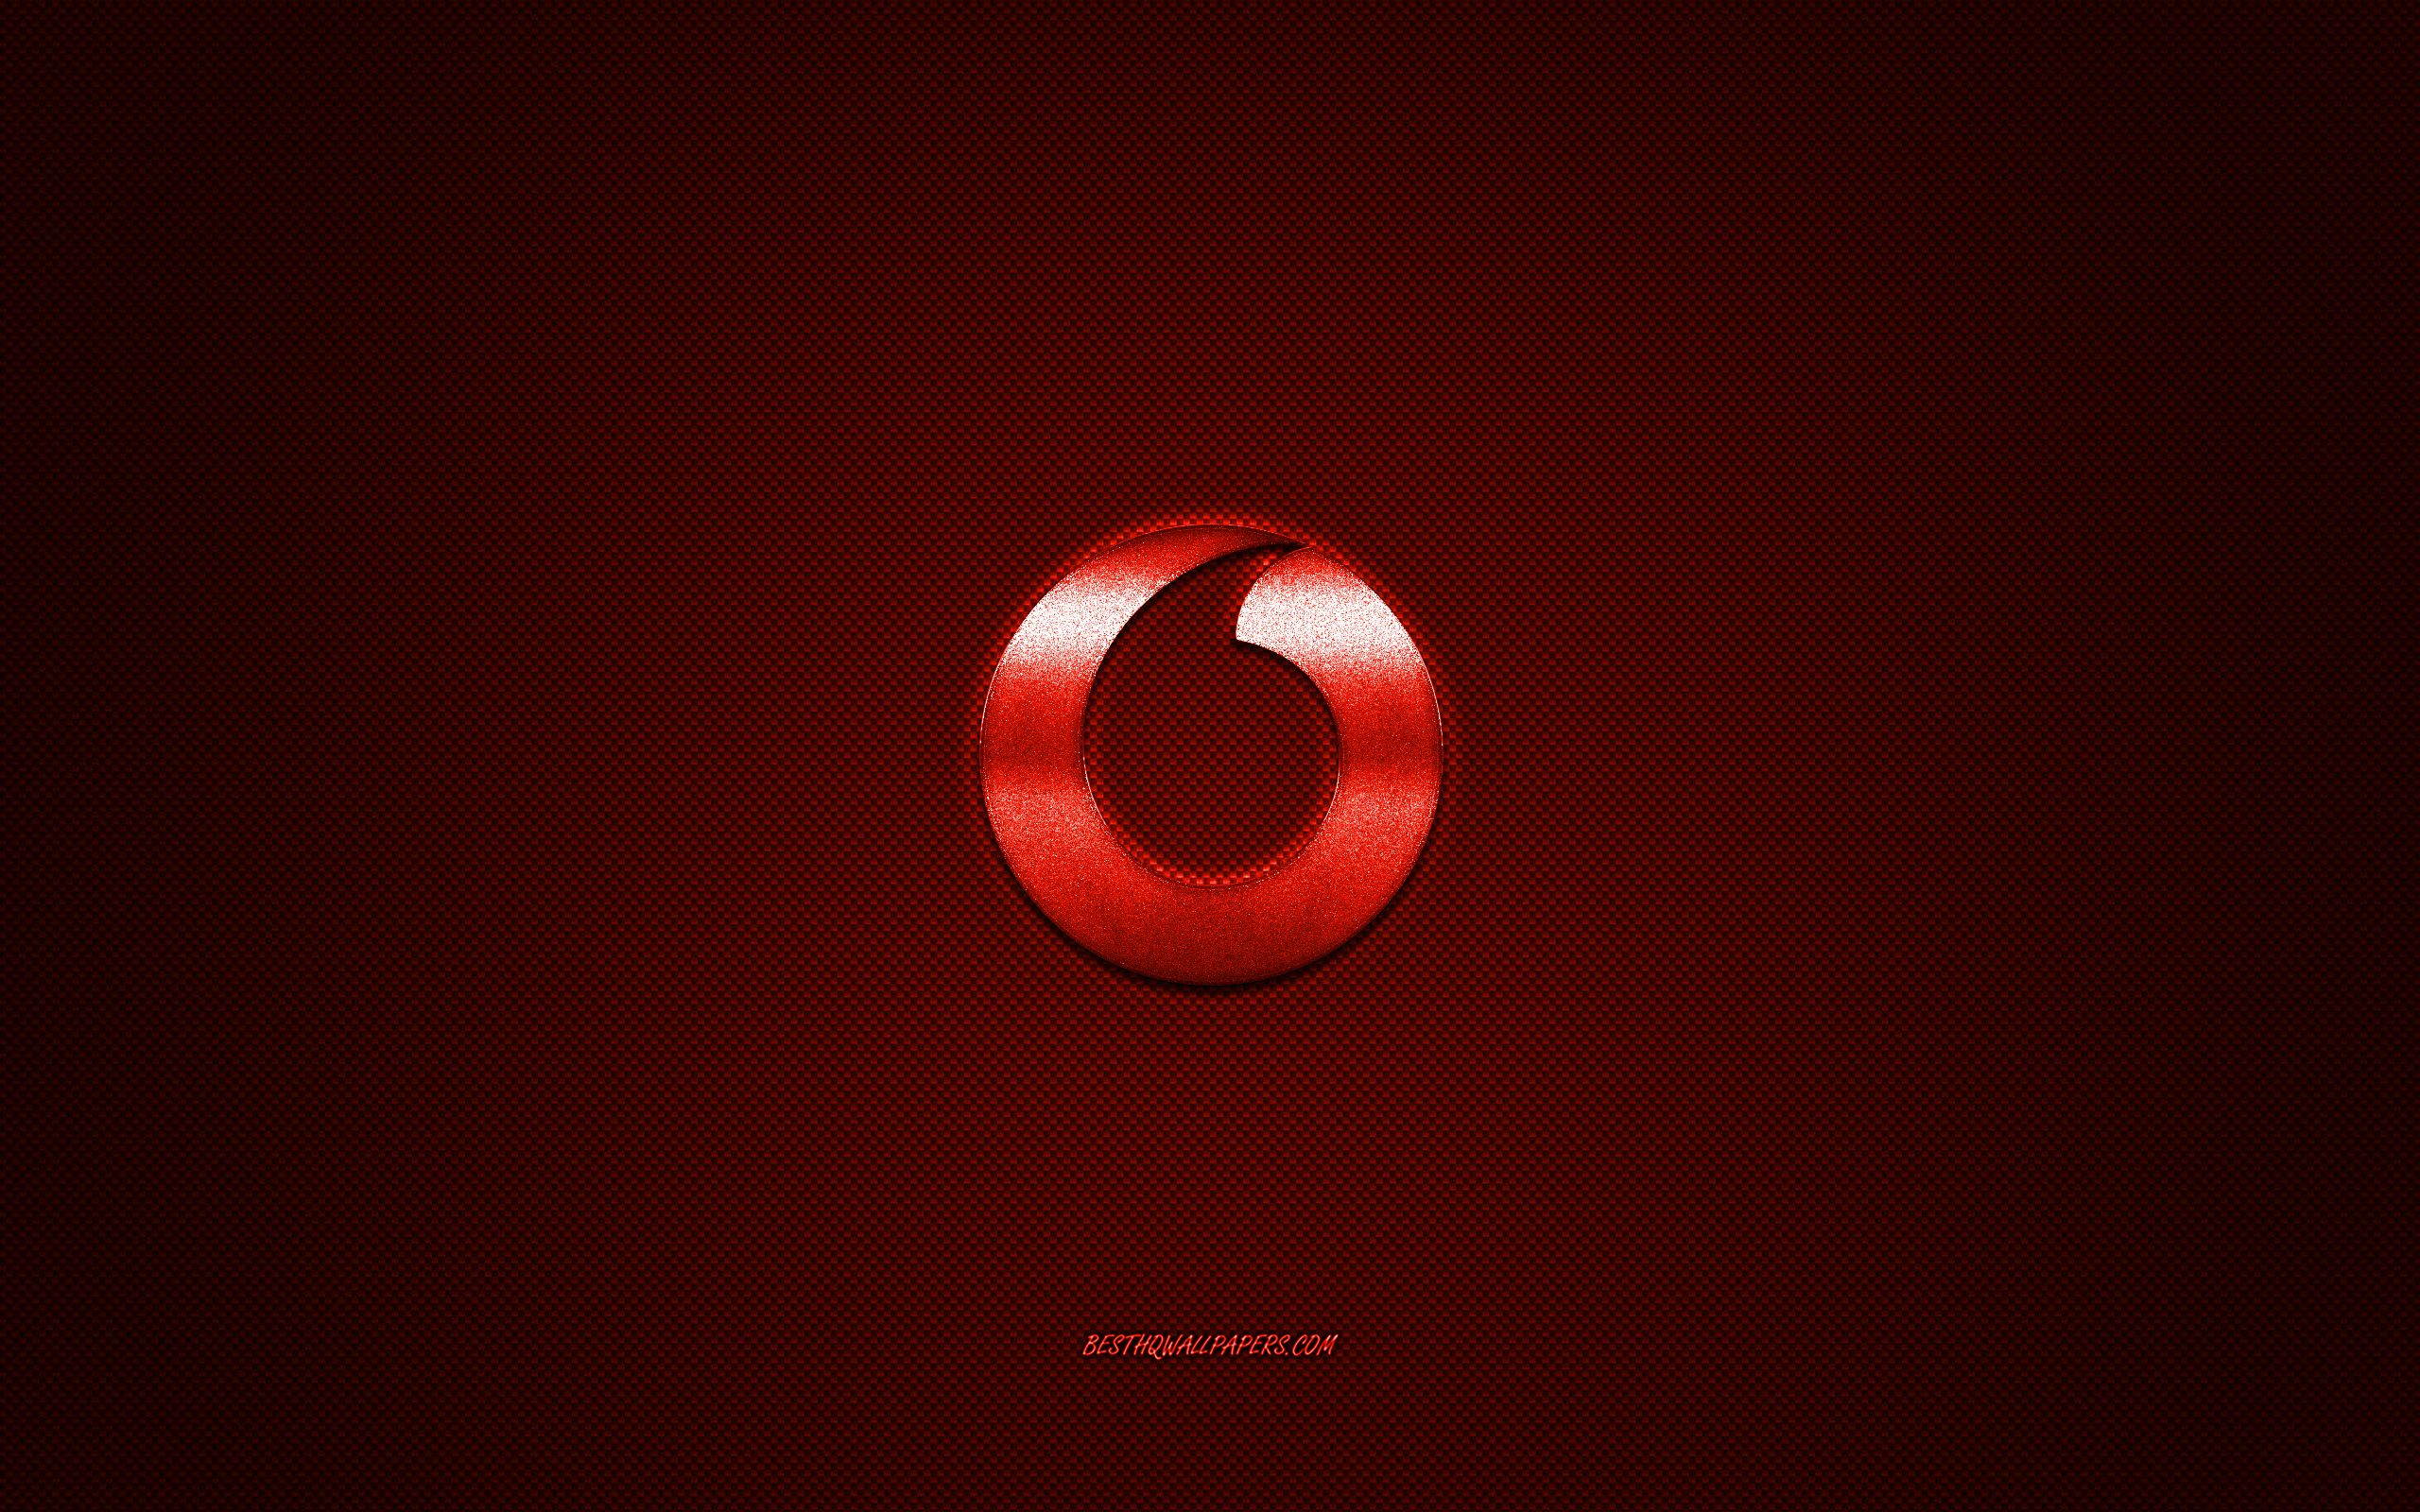 Download wallpaper Vodafone logo, red shiny logo, Vodafone metal emblem, wallpaper for Vodafone smartphones, red carbon fiber texture, Vodafone, brands, creative art for desktop with resolution 2560x1600. High Quality HD picture wallpaper